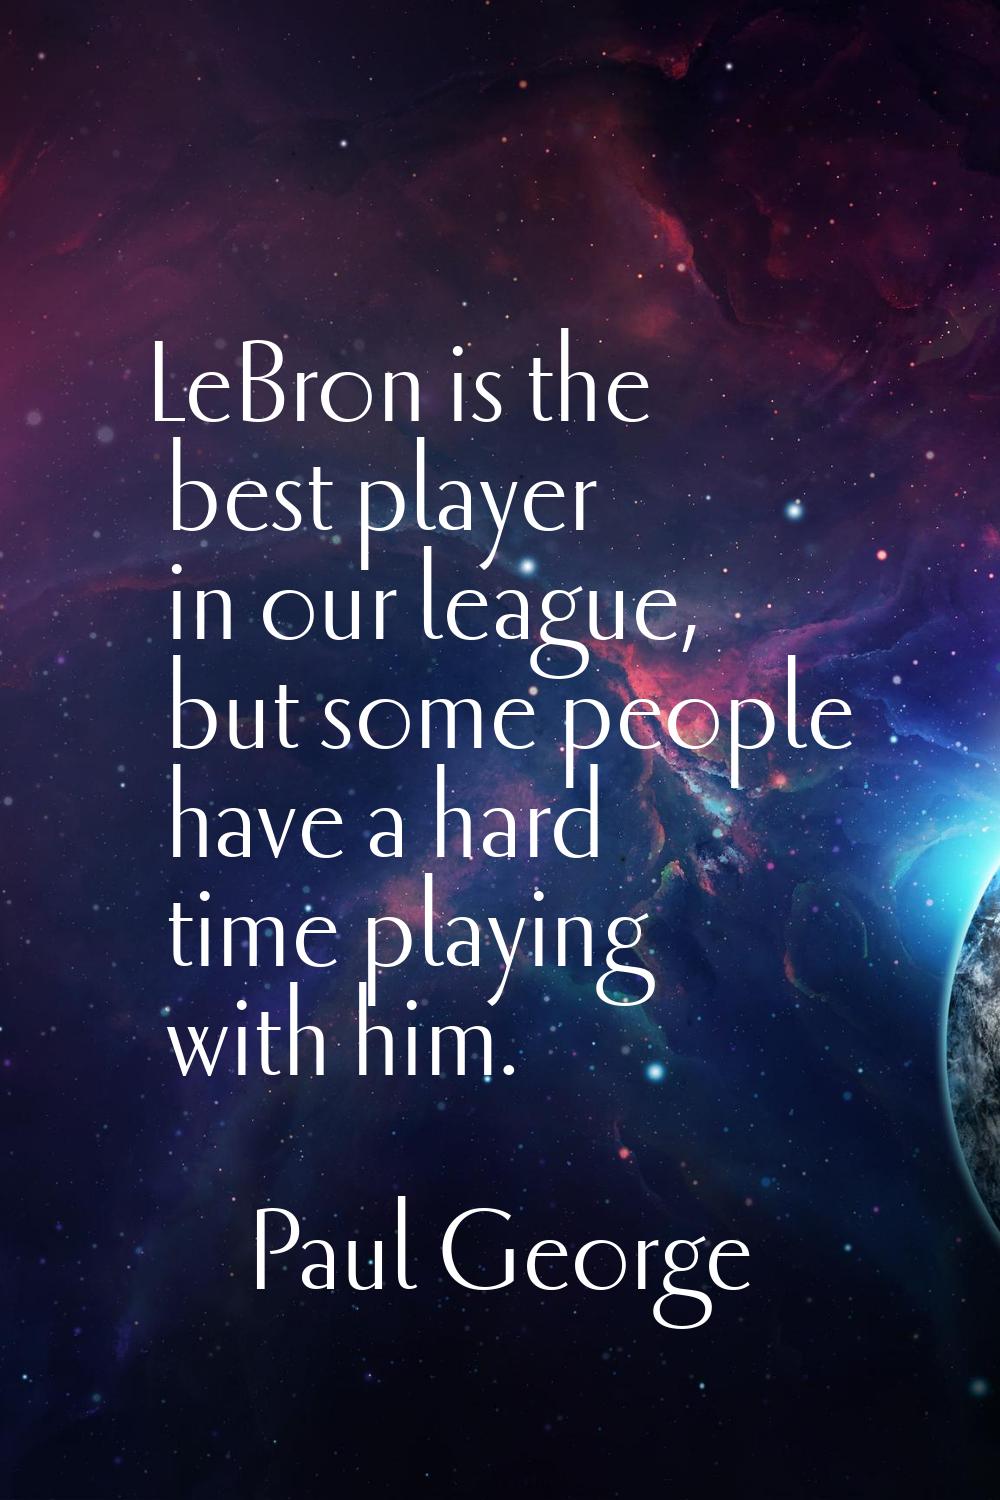 LeBron is the best player in our league, but some people have a hard time playing with him.